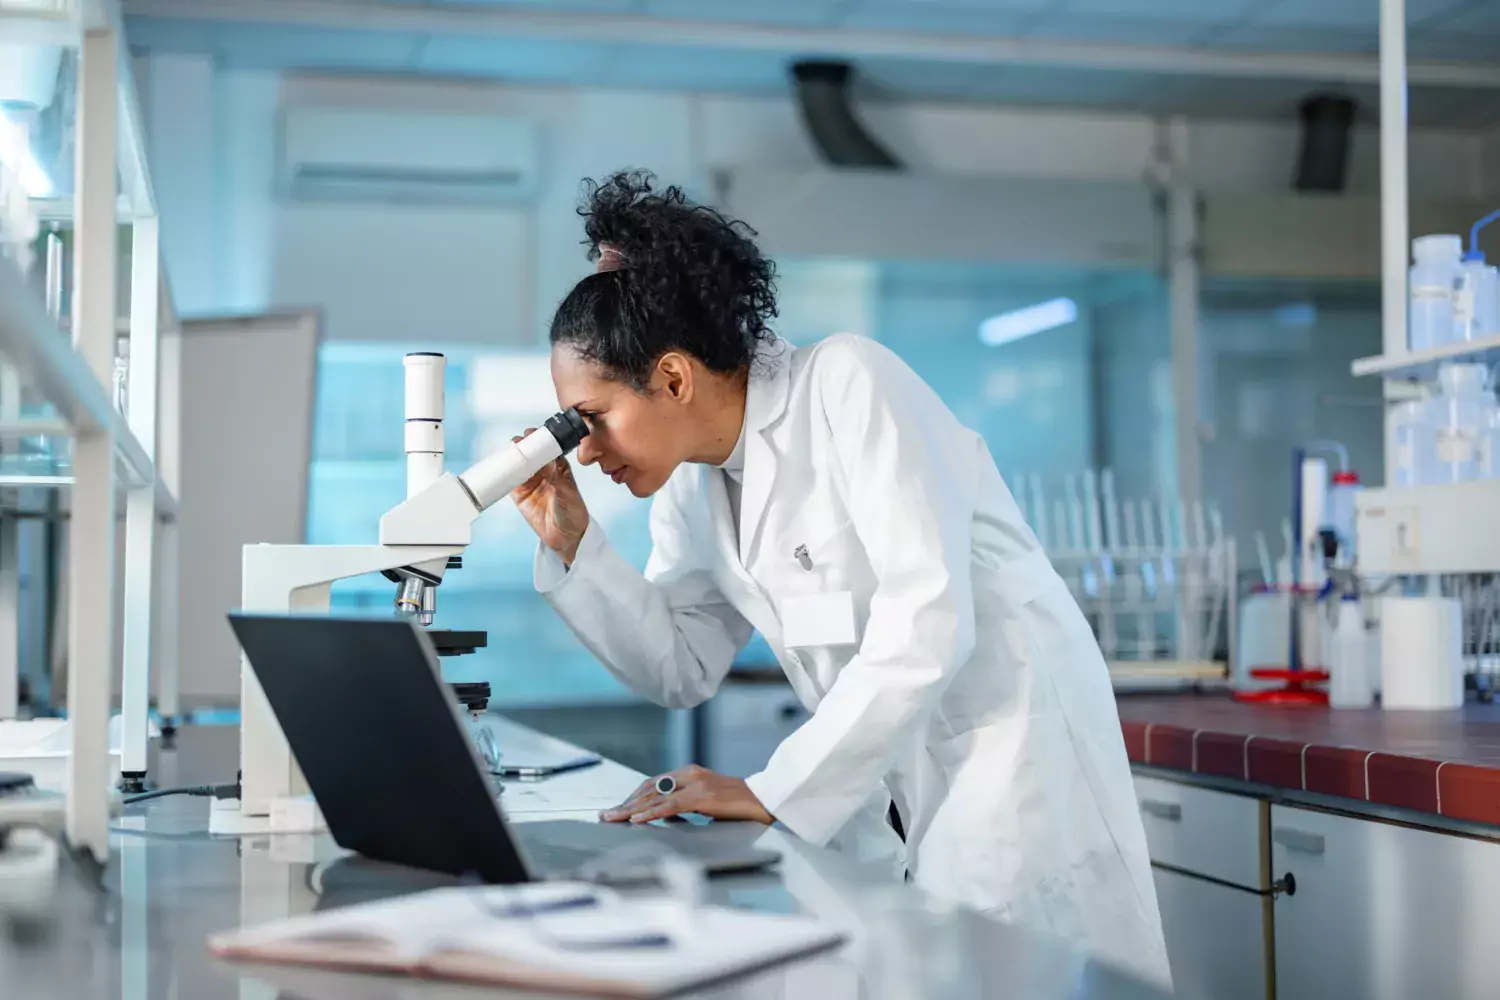 Woman in a lab looks in to a microscope.